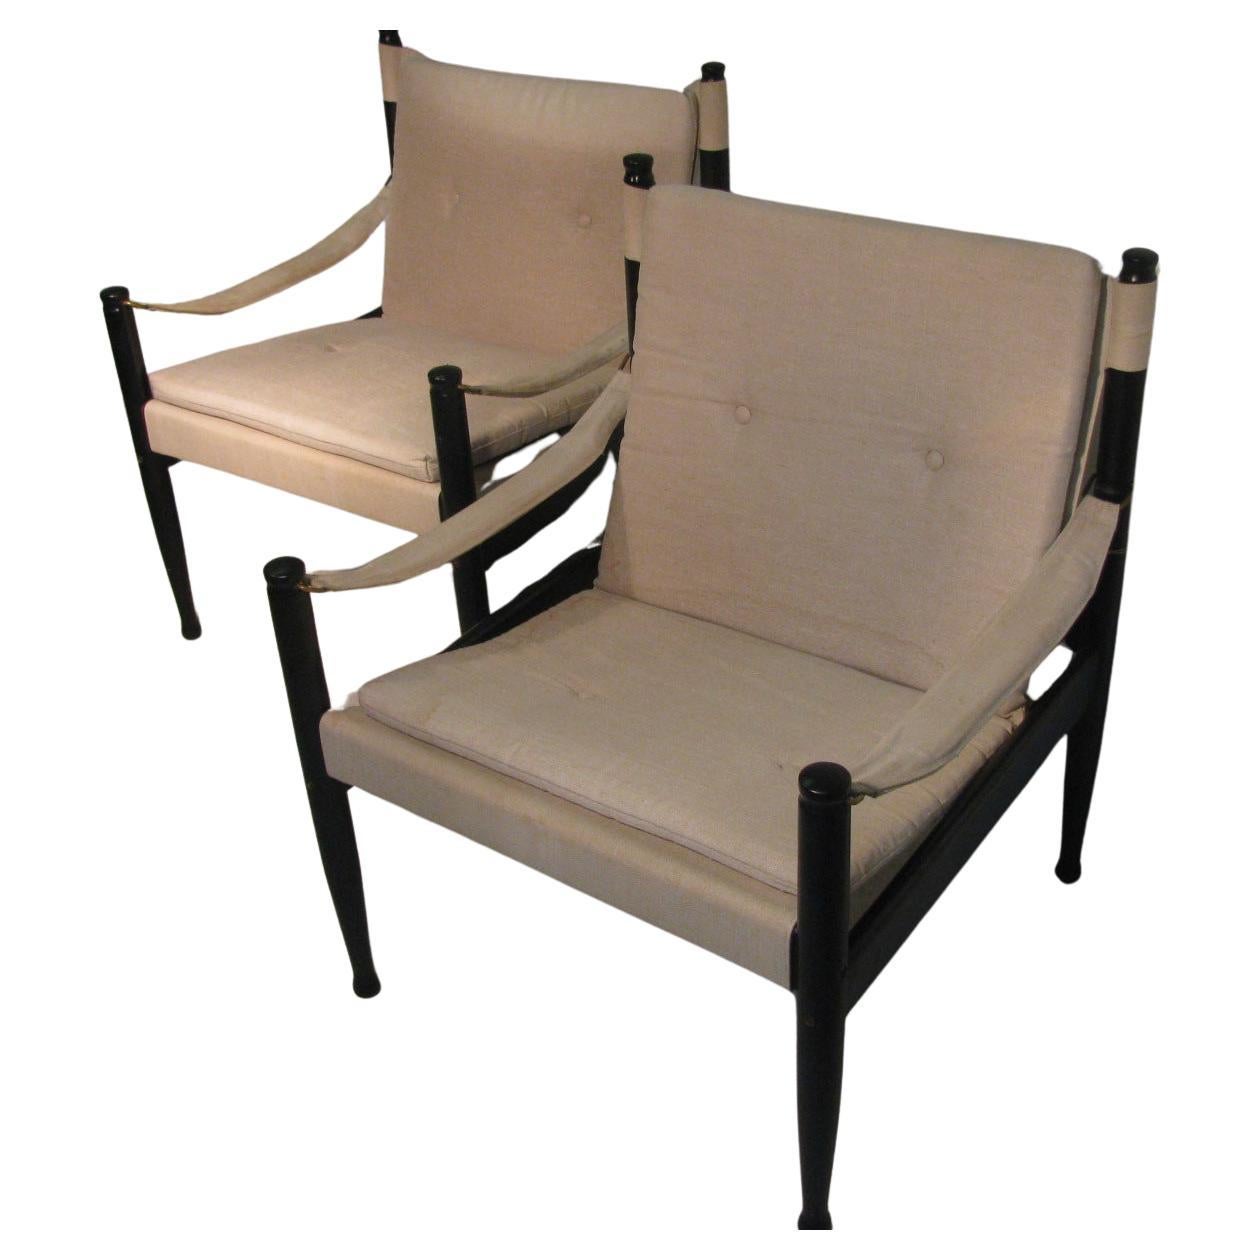 Pair of Mid-Century Modern Danish Safari Campaign Lounge Chairs by Erik Worts In Good Condition For Sale In Port Jervis, NY